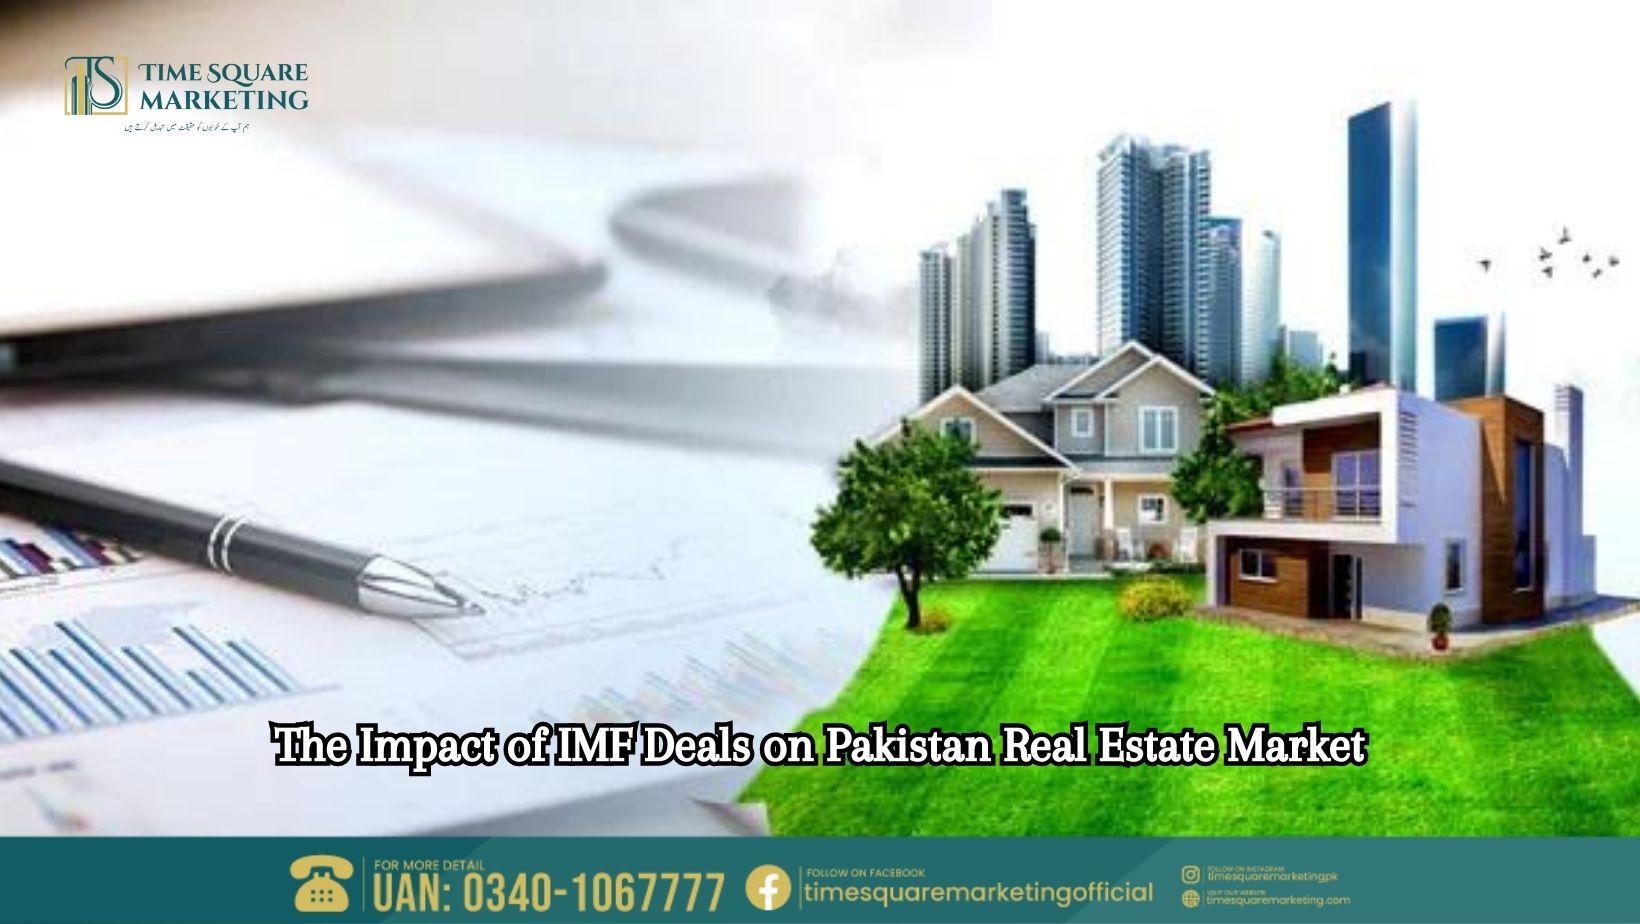 The Impact of IMF Deals on Pakistan Real Estate Market